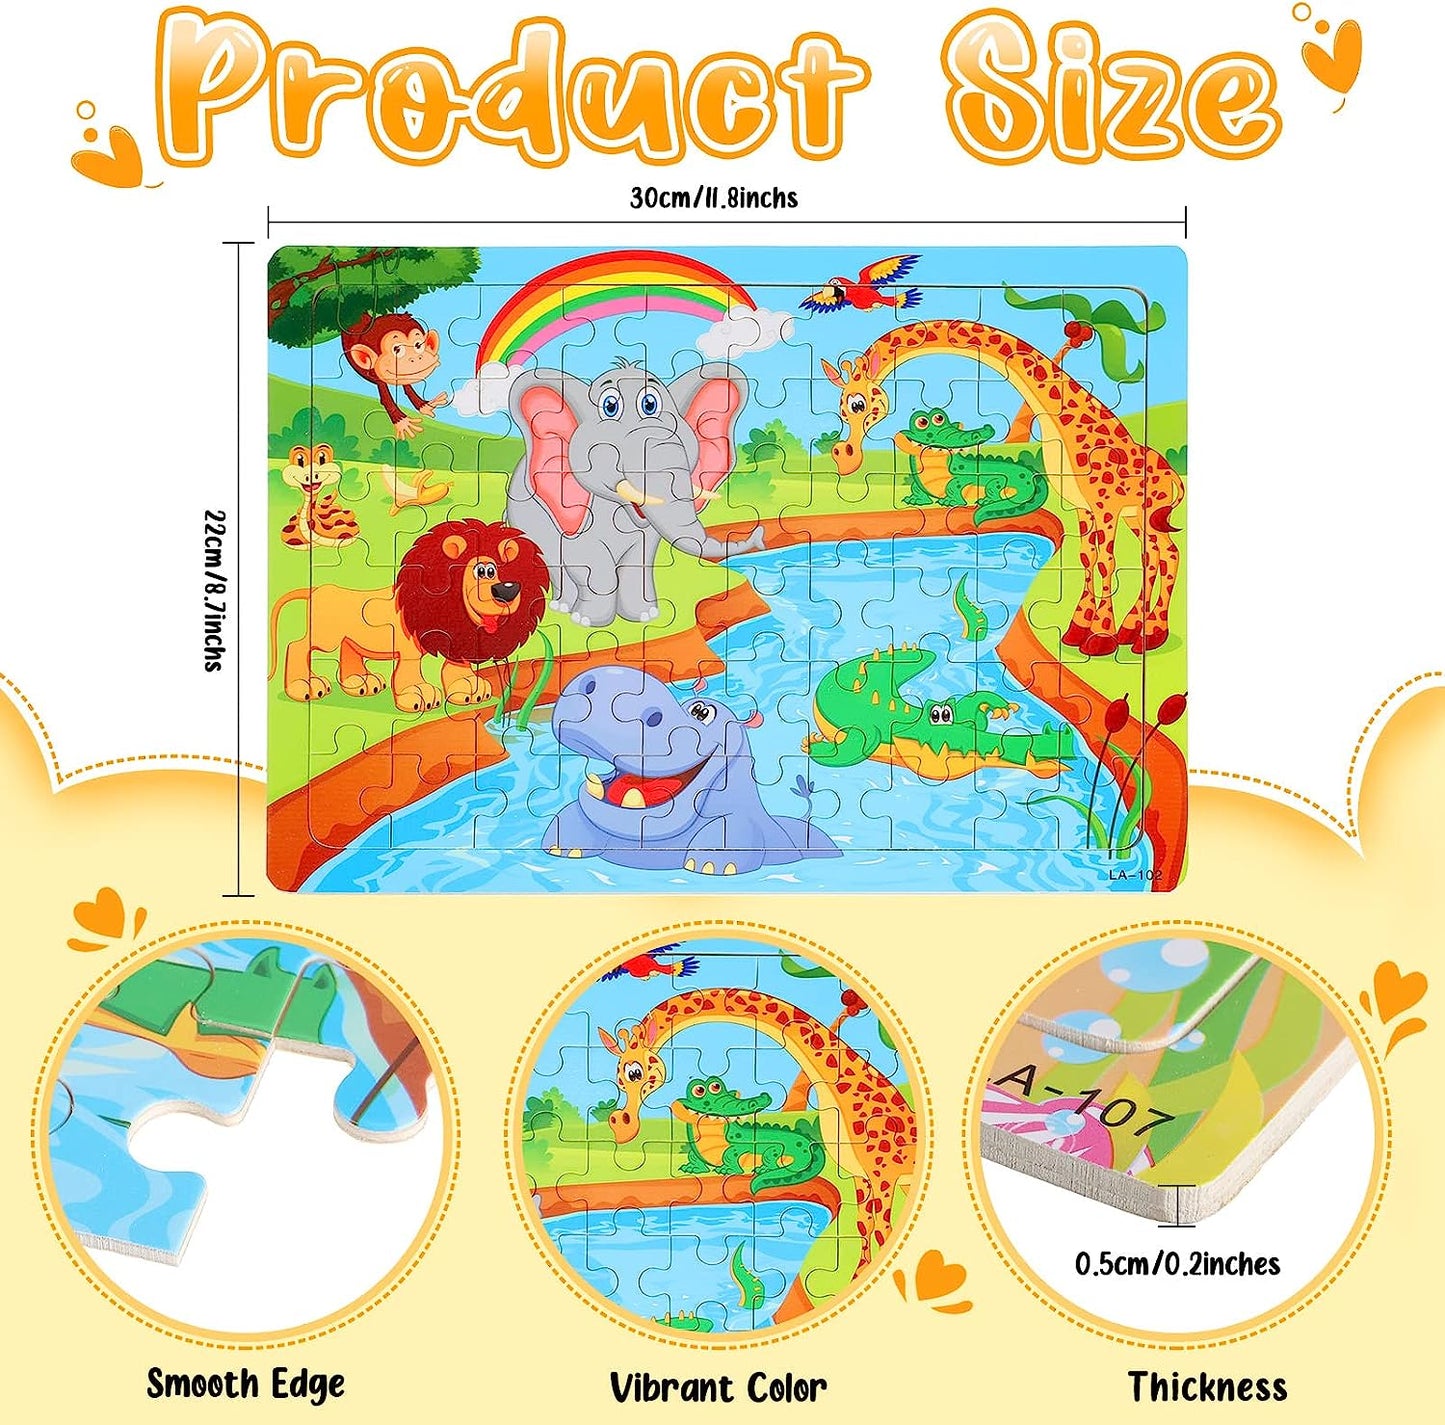 12 Packs Wooden Puzzles for Kids Ages 3-8,60 Piece Wooden Puzzles for Toddler Learning Educational Puzzles Wood Jigsaw Puzzles for Kids Toddler Games Boy Girl Preschool Animal Space Car Theme